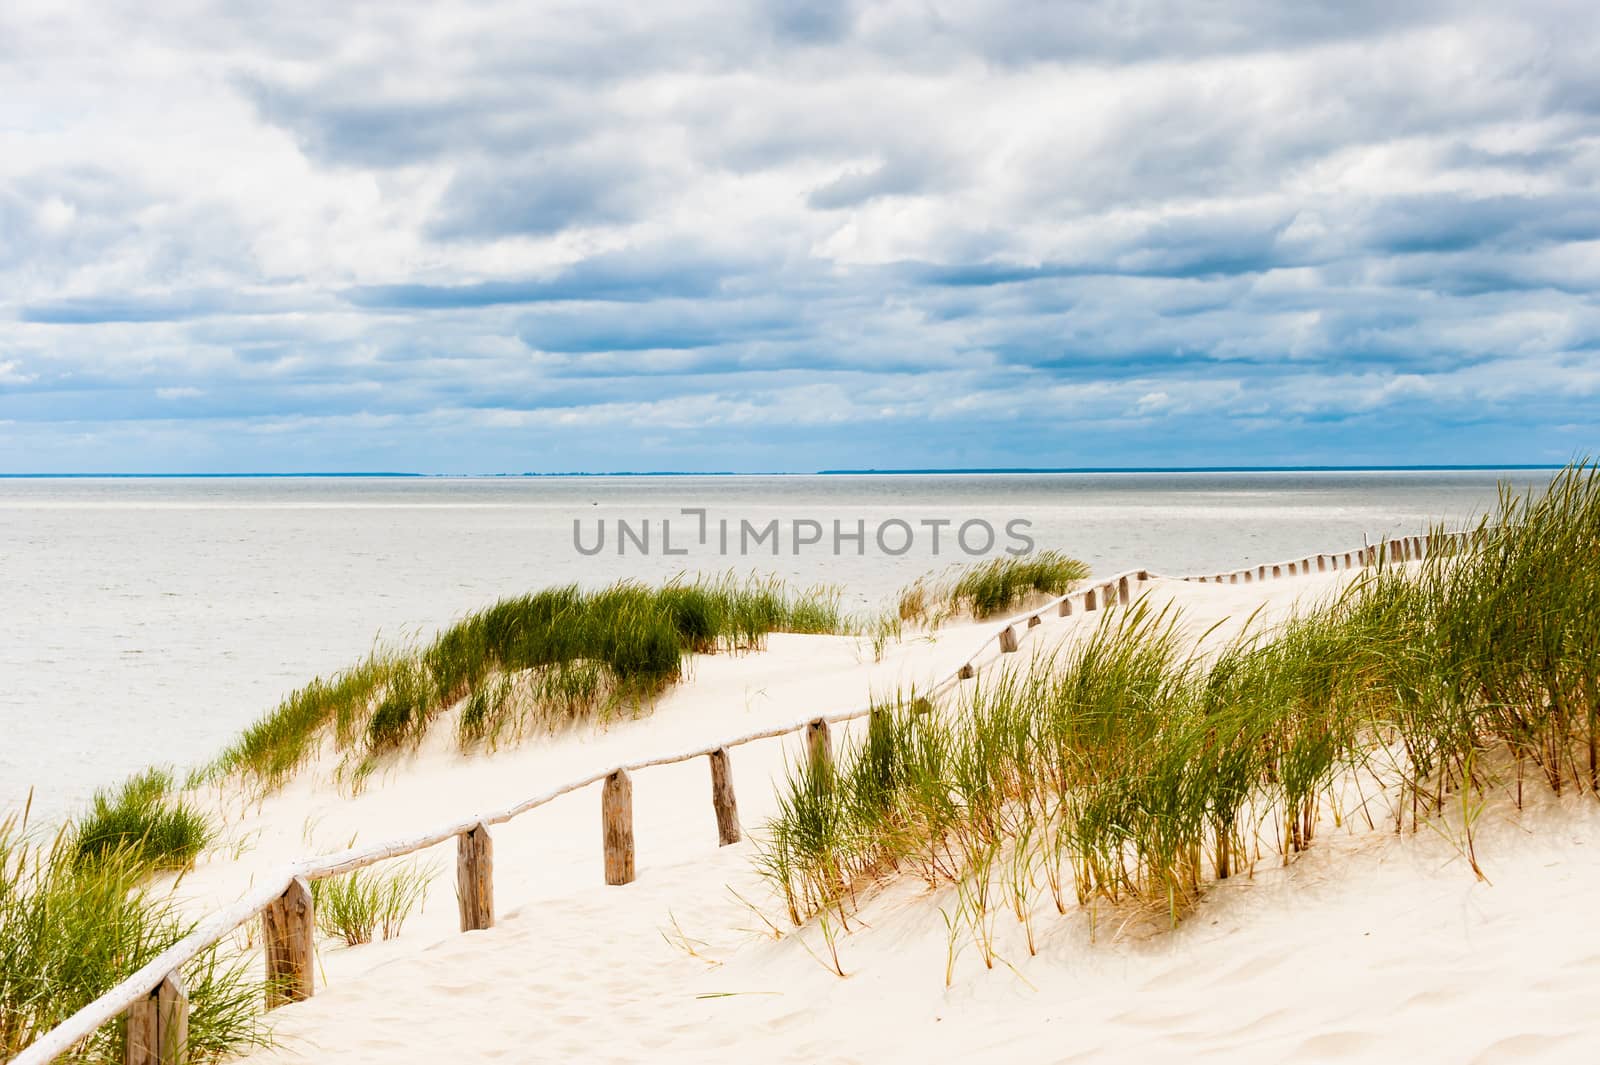 Fence on dune at seaside with stormy clouds visible. by westernstudio